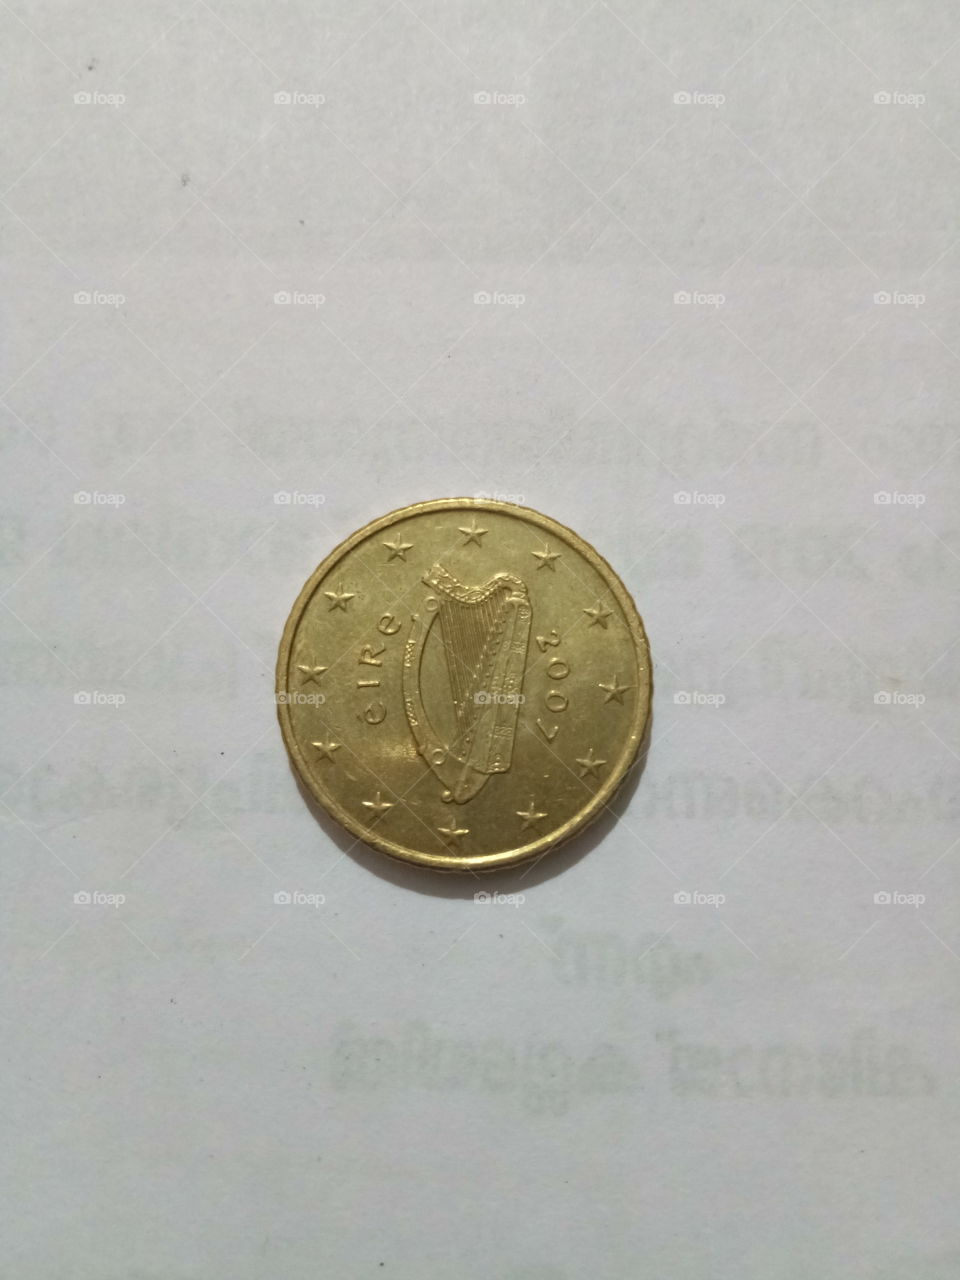 50 Euro cent coin back side